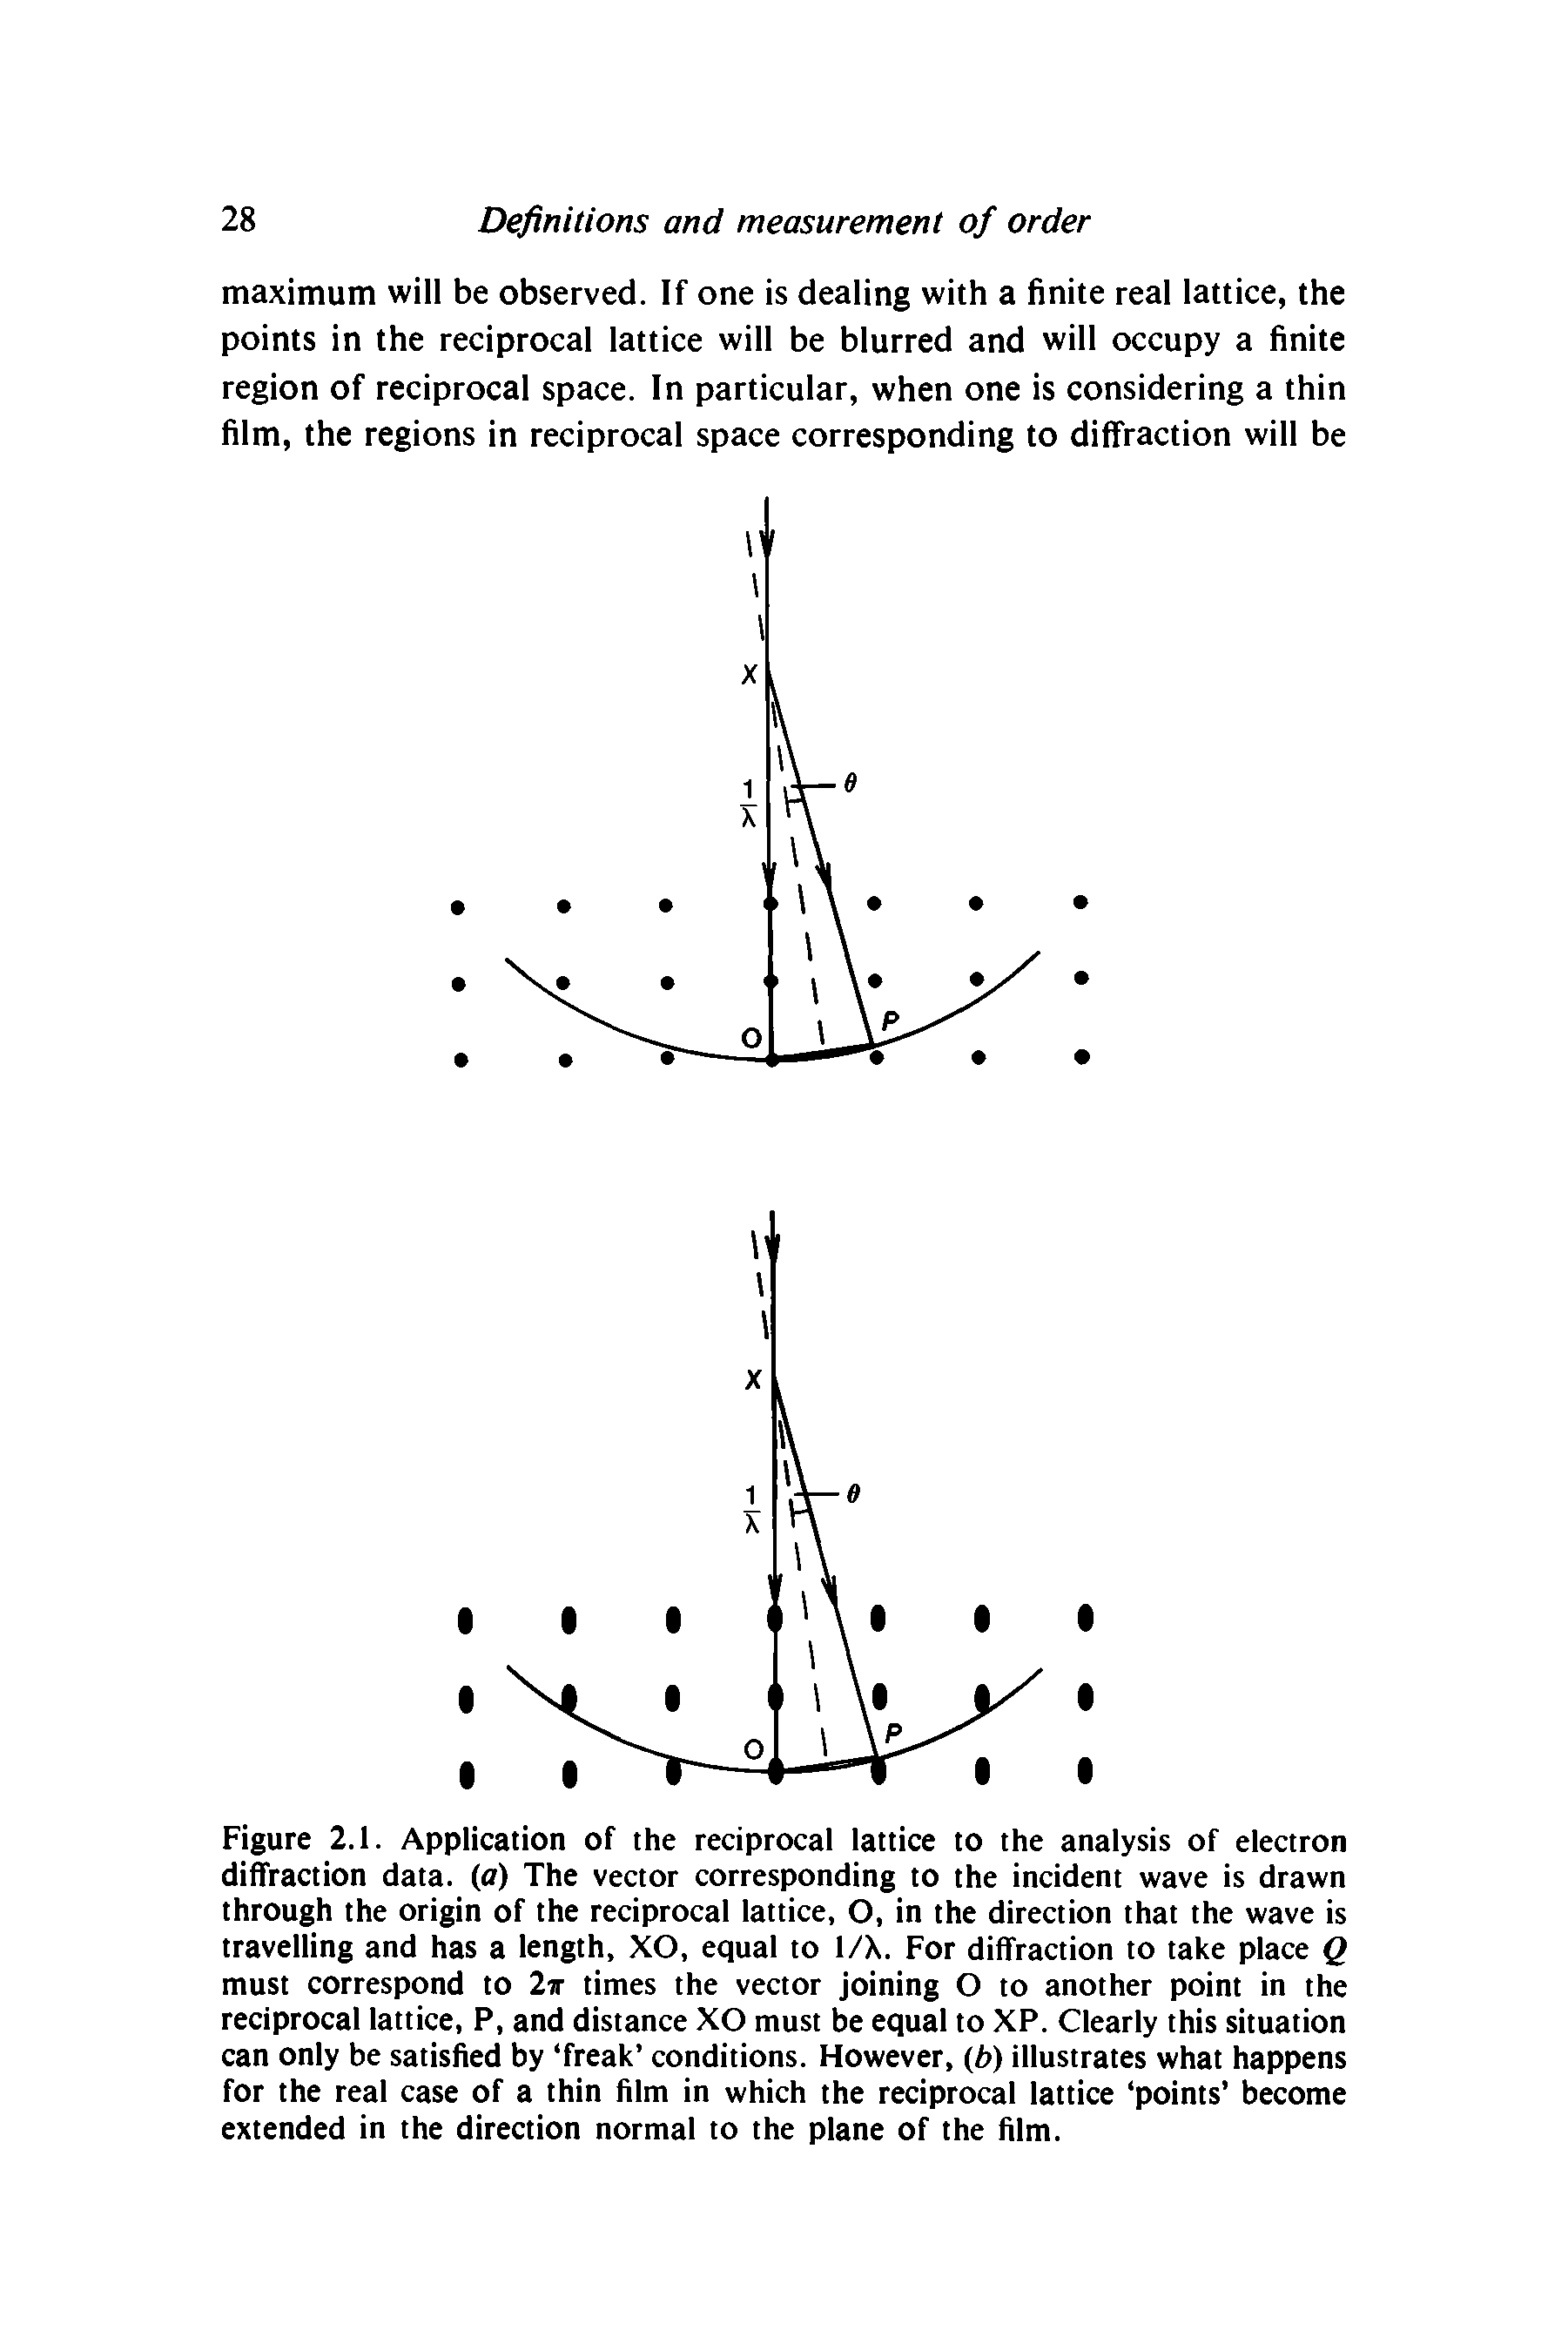 Figure 2.1. Application of the reciprocal lattice to the analysis of electron diffraction data, (a) The vector corresponding to the incident wave is drawn through the origin of the reciprocal lattice, O, in the direction that the wave is travelling and has a length, XO, equal to 1/X. For diffraction to take place Q must correspond to 2ir times the vector joining O to another point in the reciprocal lattice, P, and distance XO must be equal to XP. Clearly this situation can only be satisfied by freak conditions. However, (b) illustrates what happens for the real case of a thin film in which the reciprocal lattice points become extended in the direction normal to the plane of the film.